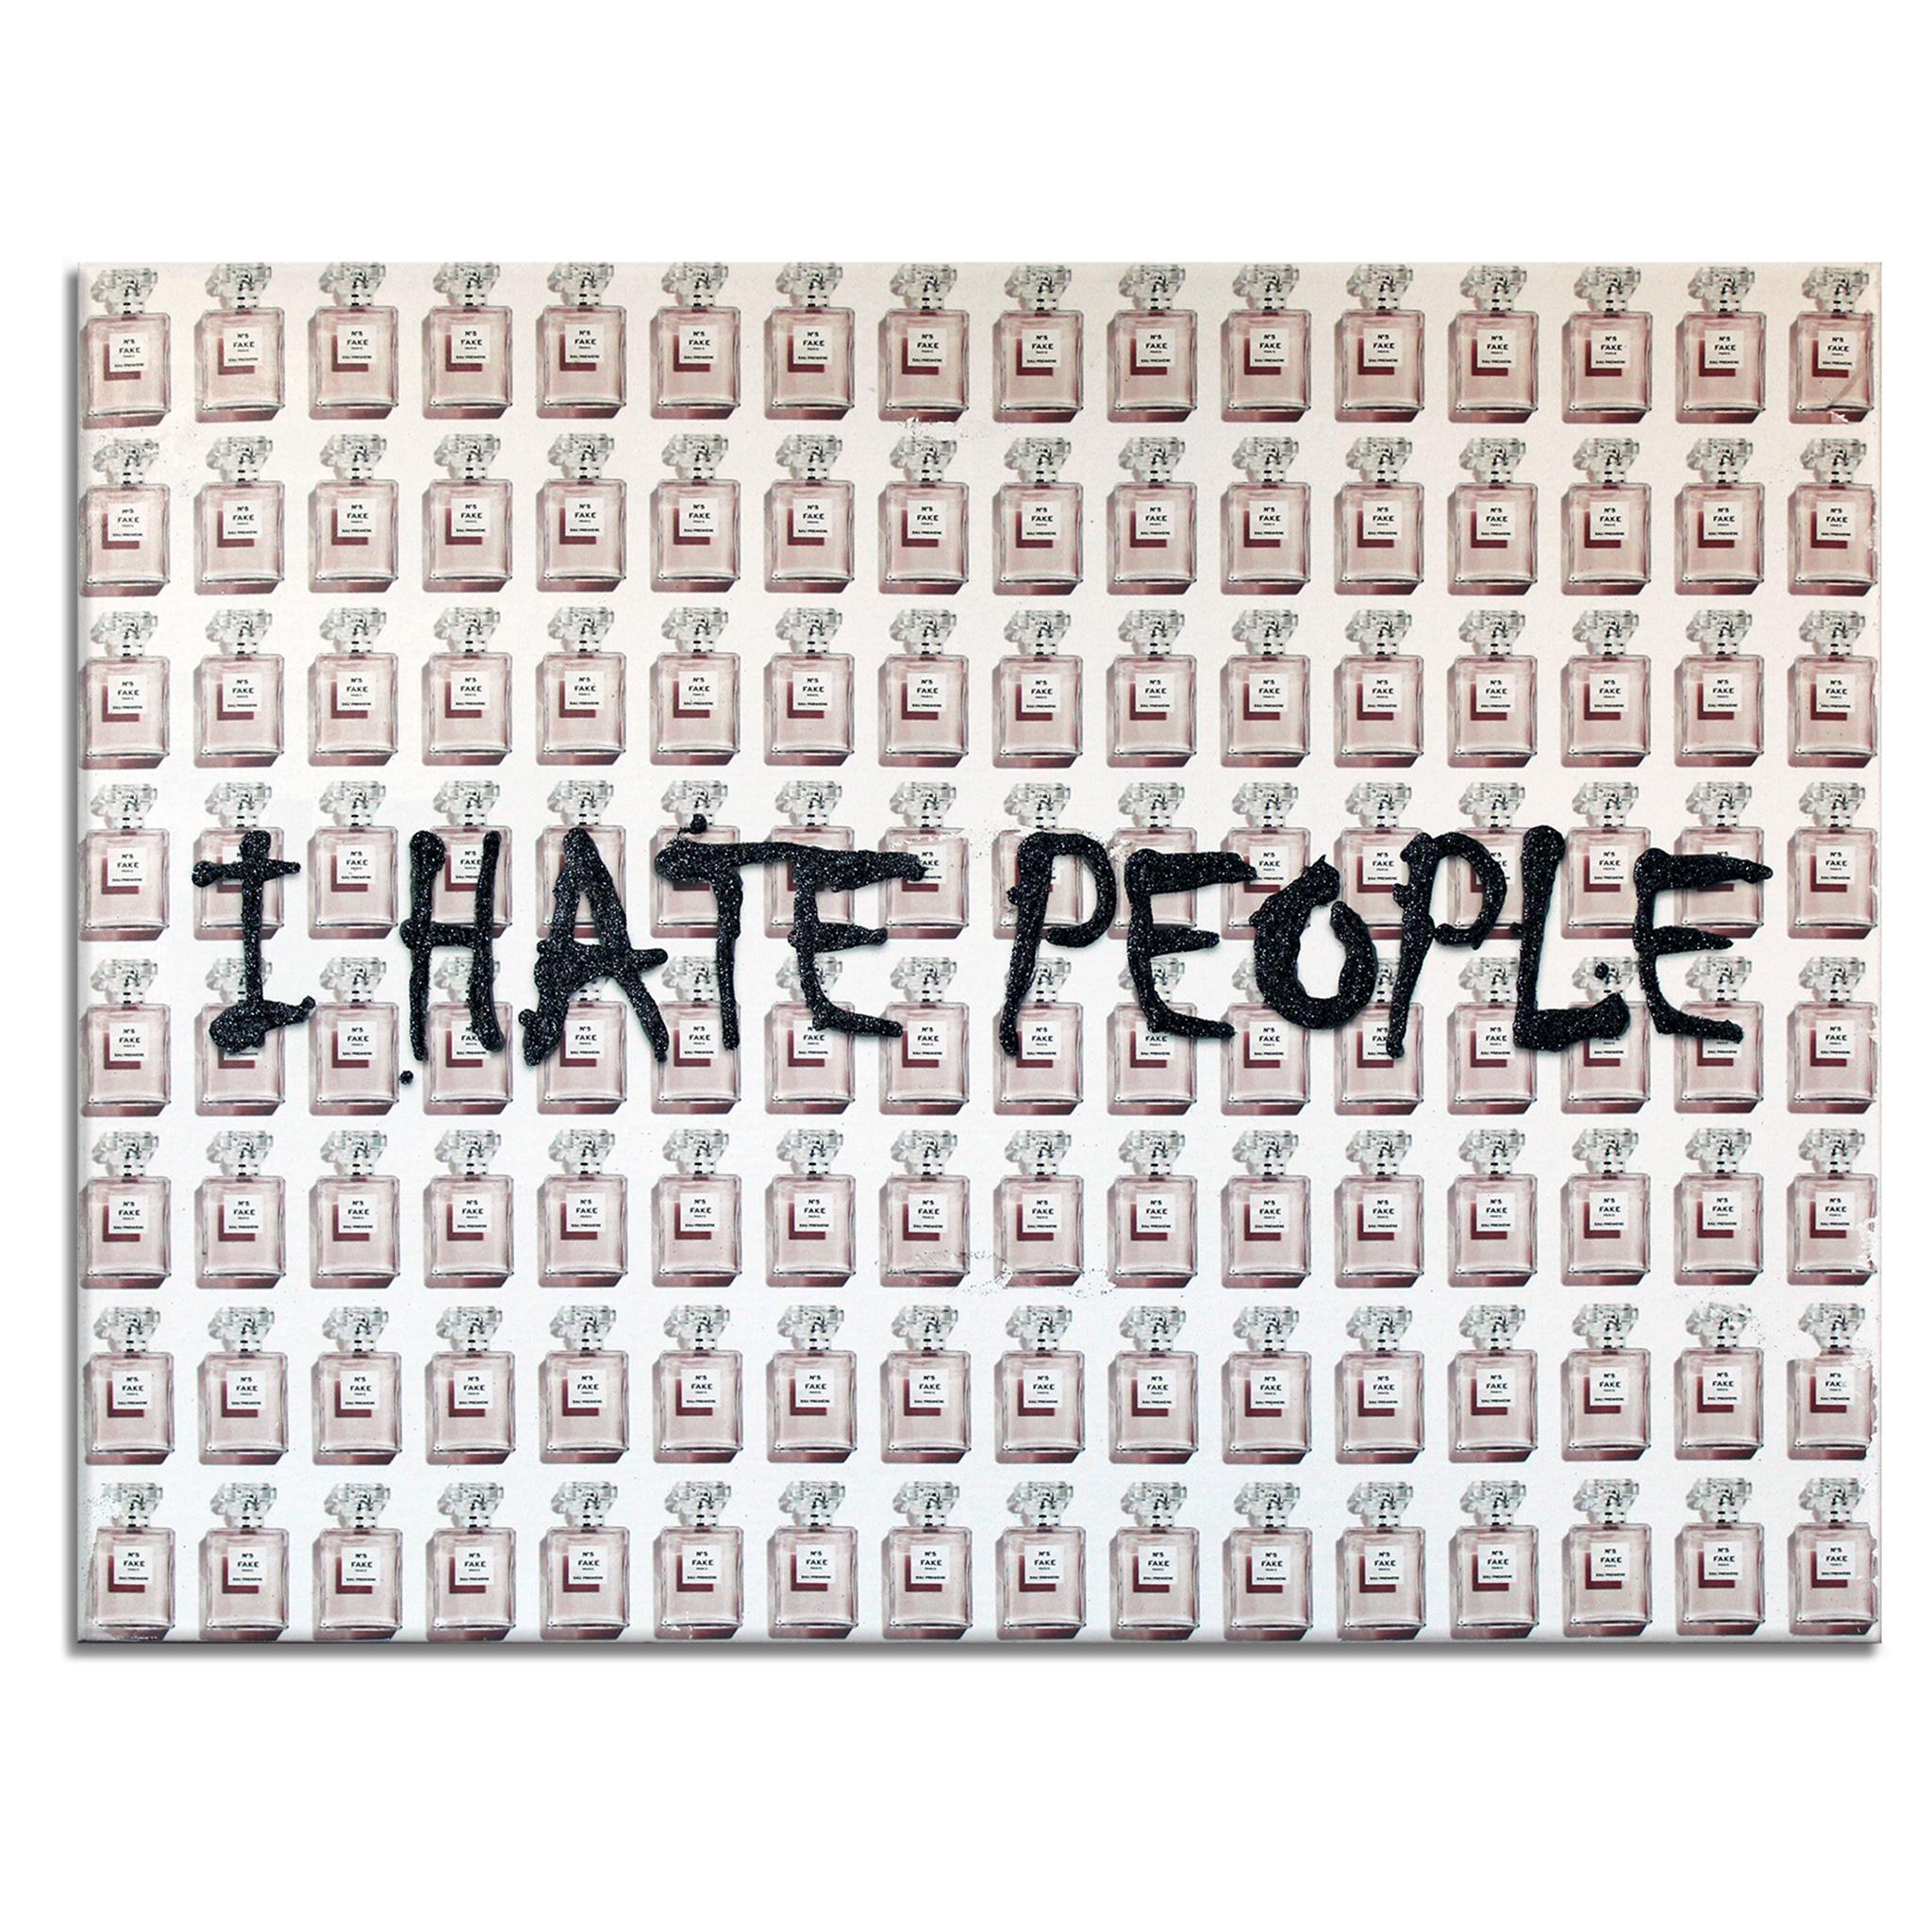 'Pink' Wrapped Canvas Original Pop Art is a bold statement piece, featuring a background pattern of faux Chanel No. 5 perfume bottles in tones of pink and white, veiled with the black-glittered word art "I Hate People." Introspective and playful